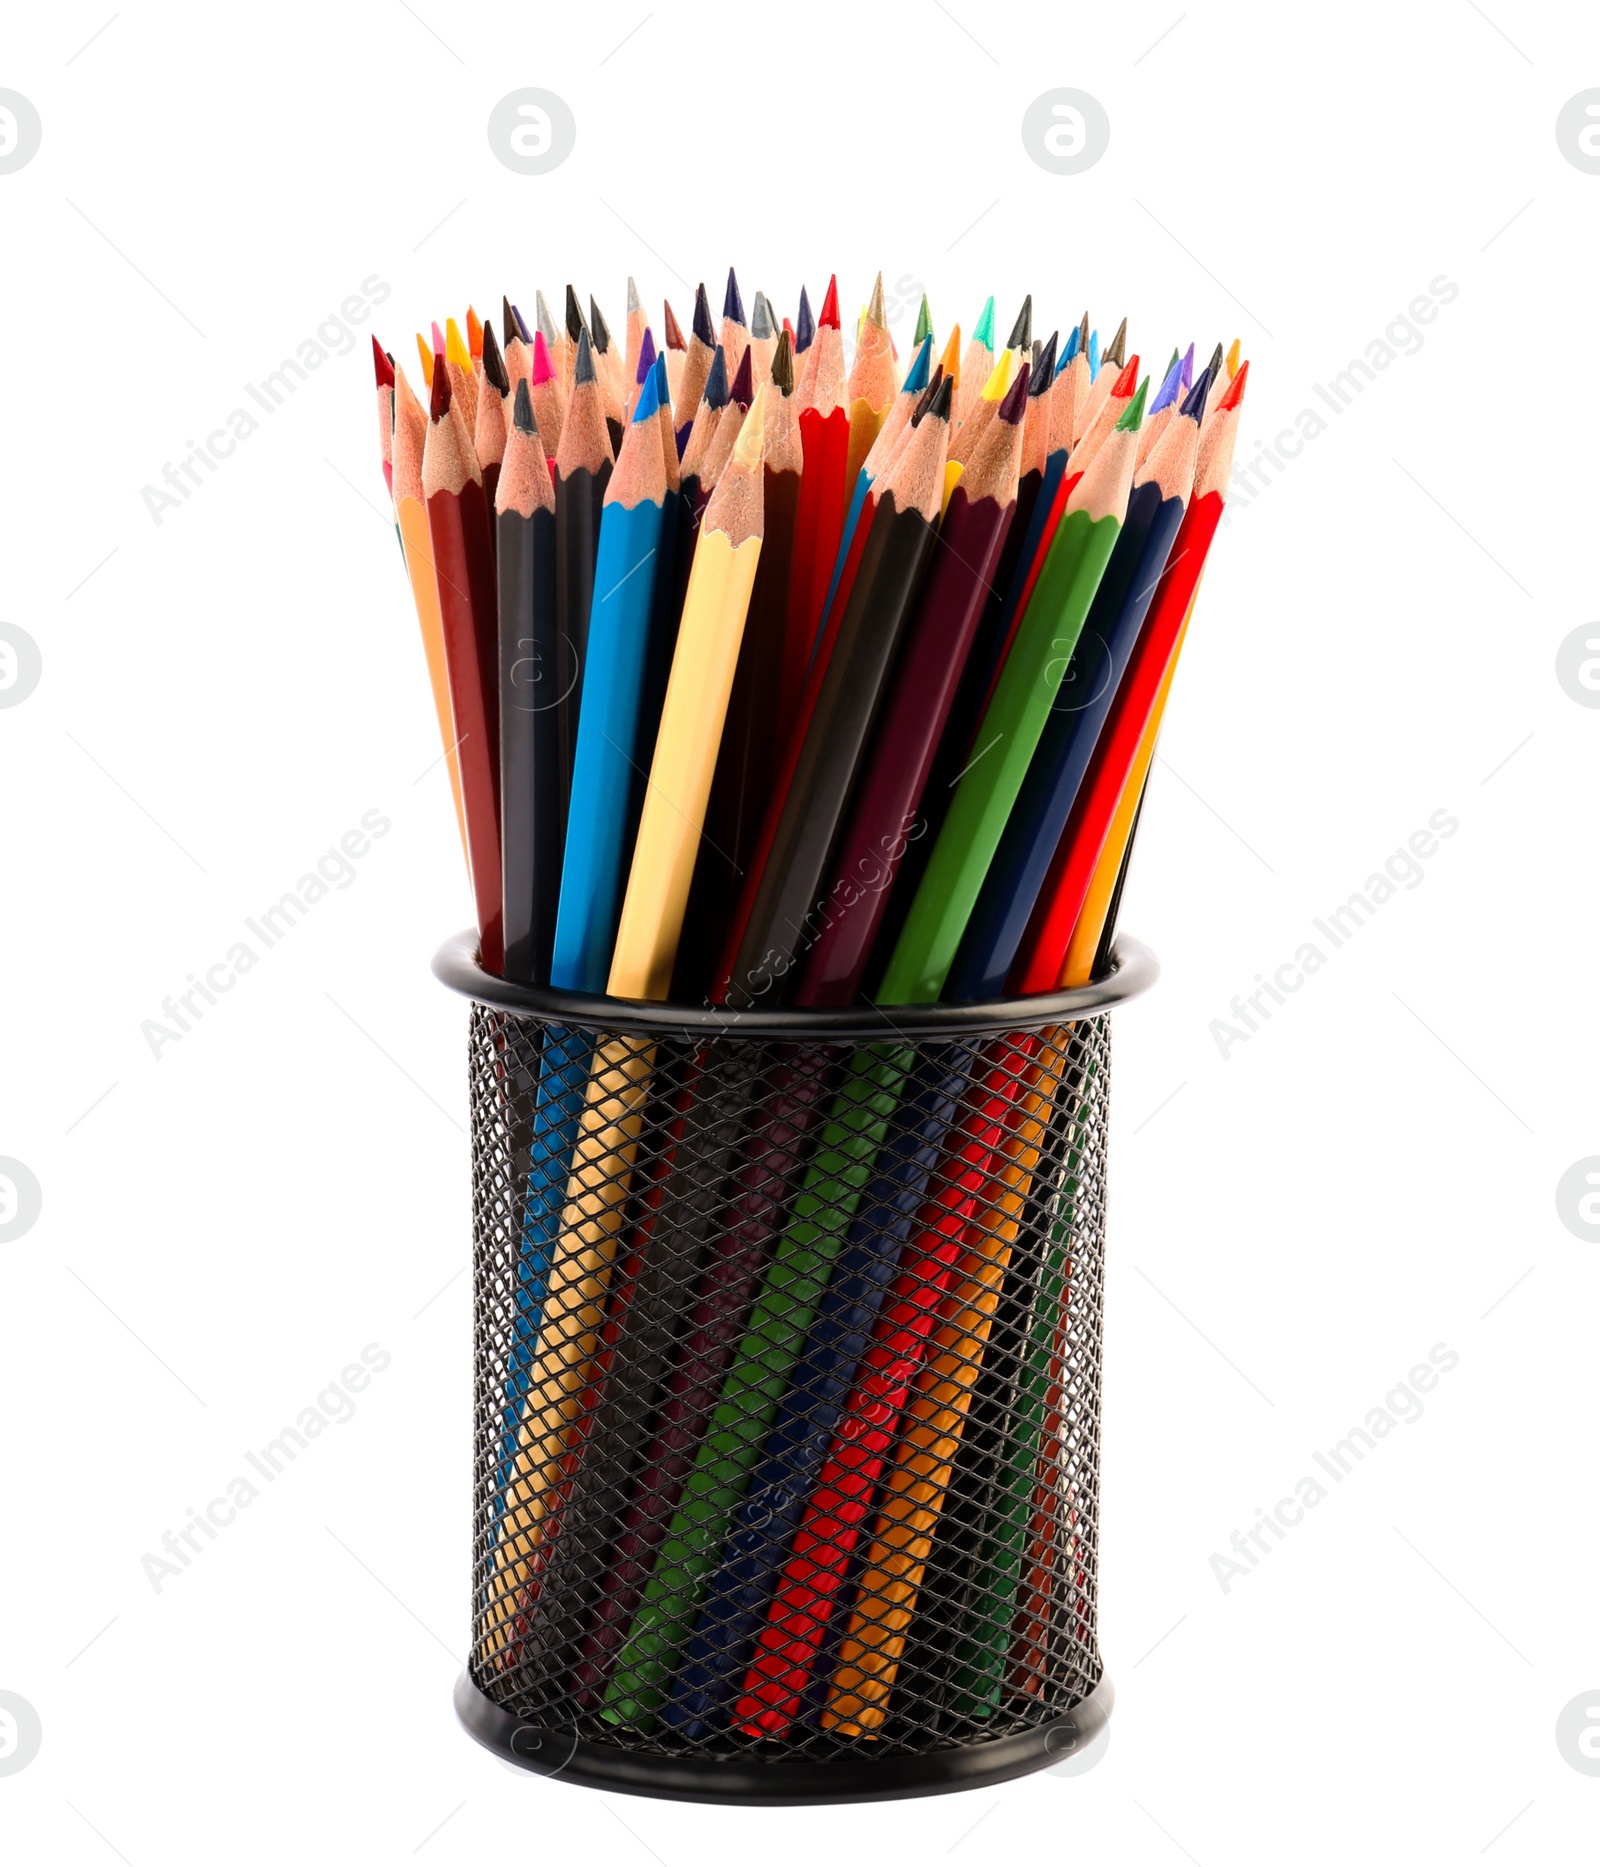 Photo of Holder with color pencils on white background